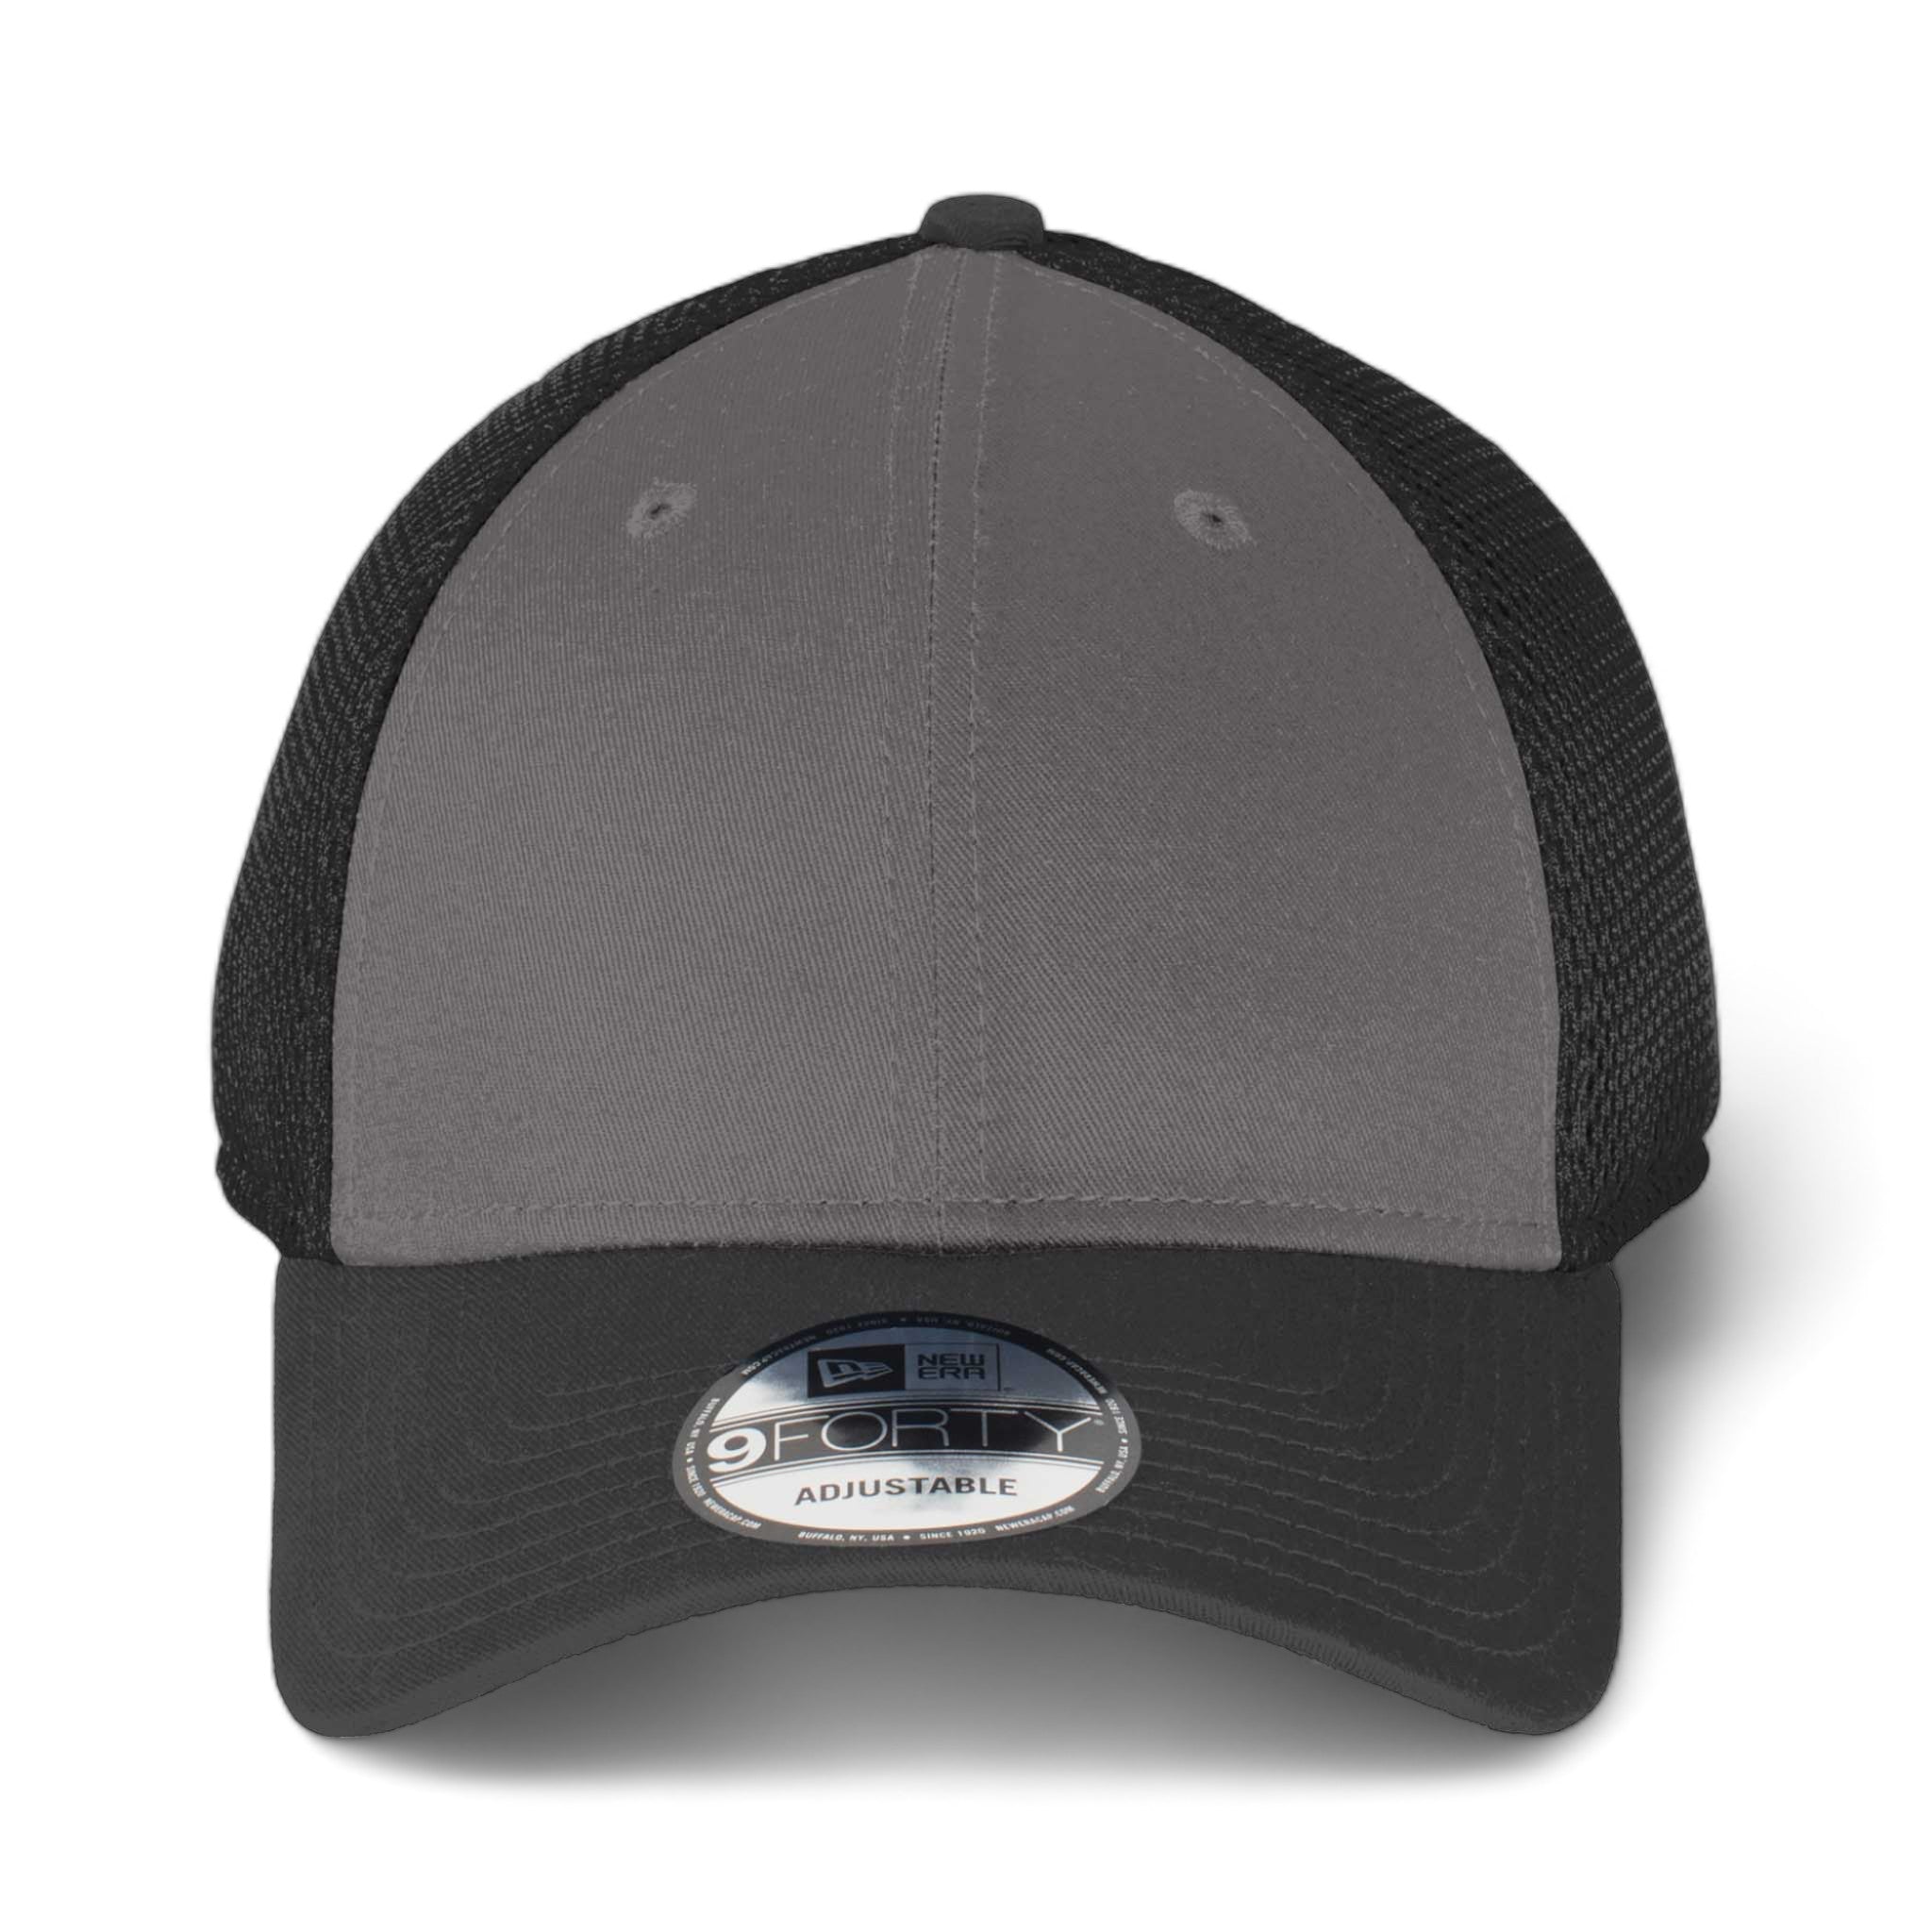 Front view of New Era NE204 custom hat in charcoal and black